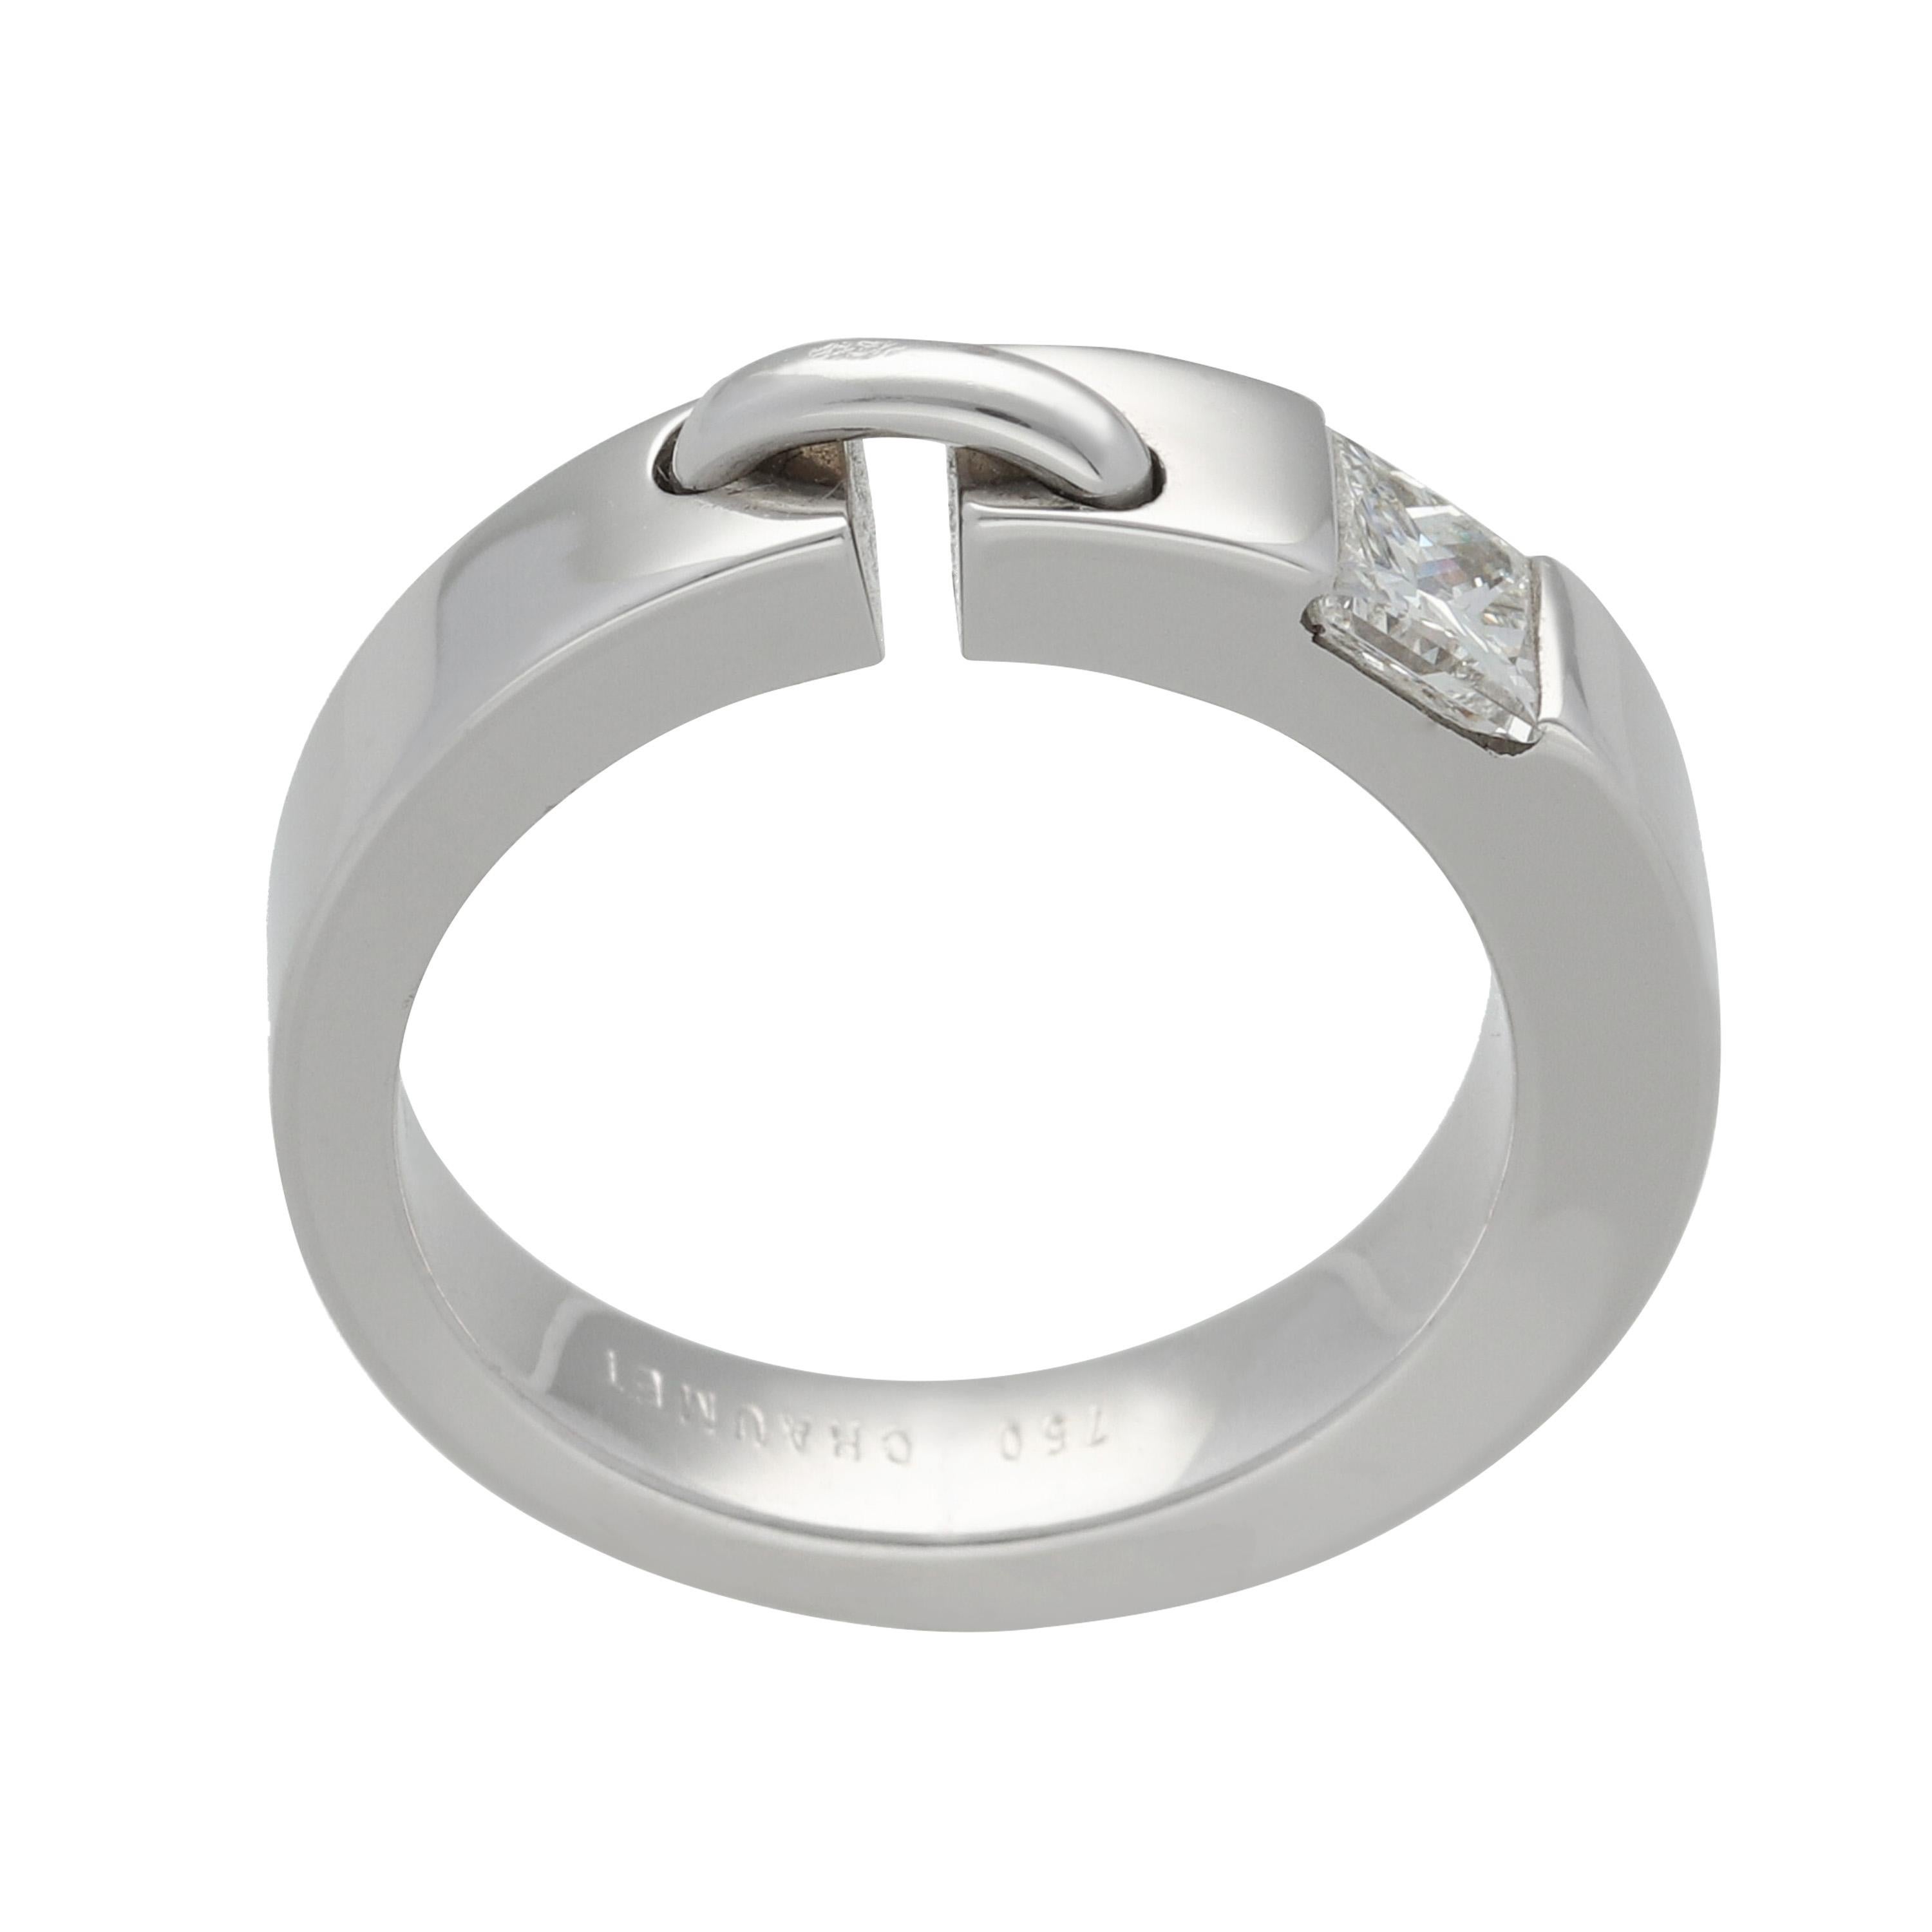 A 750 white gold Chaumet  'Liens' simple model ring, set with a 0.45 ct princess cut diamond. 

The princess cut is a diamond cut shape and has a square or rectangular shape when viewed from above, and from the side is similar to that of an inverted